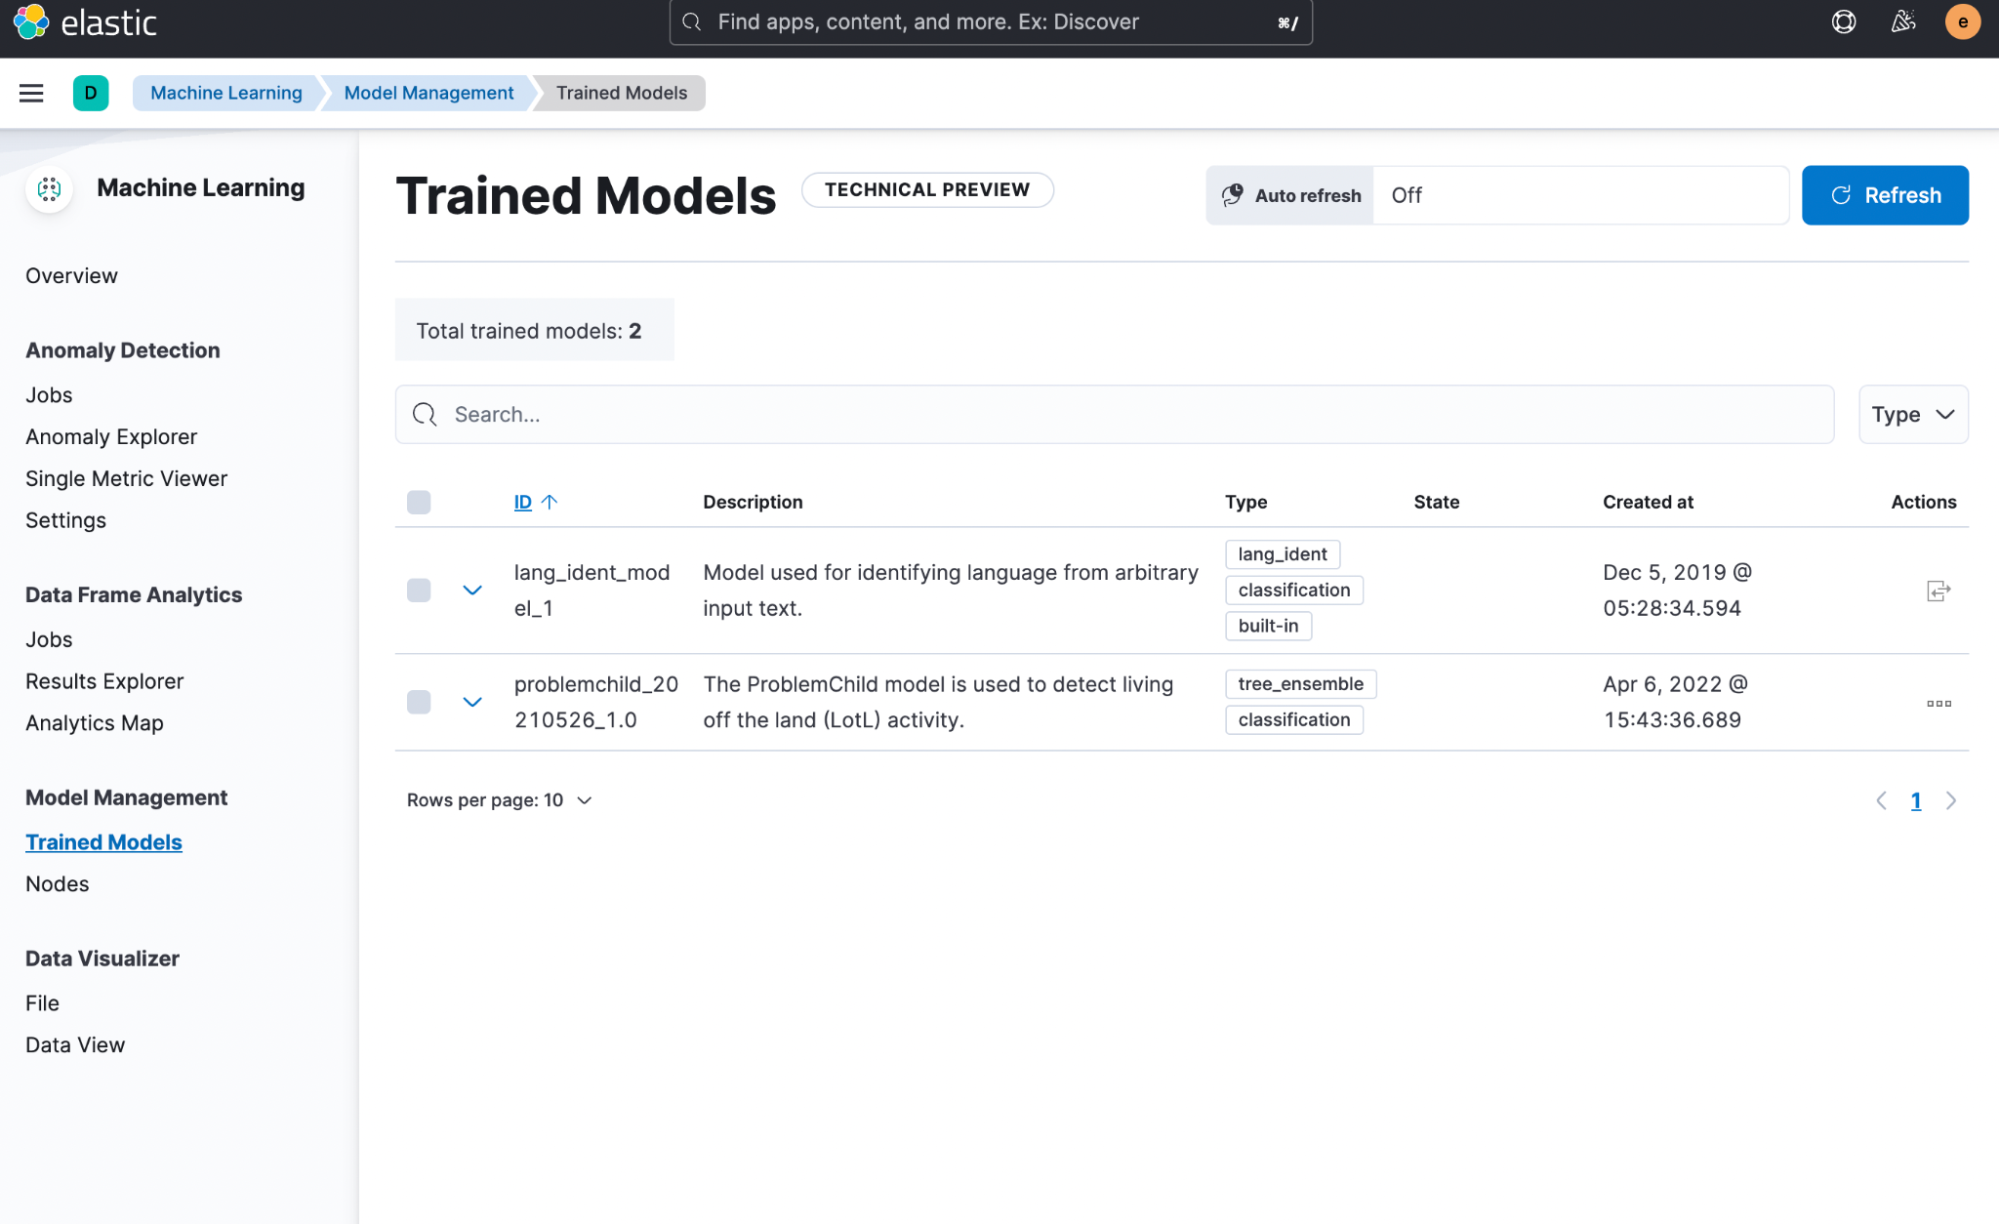 Similarly, the installed ProblemChild model can now be seen in Machine Learning > Model Management > Trained Models